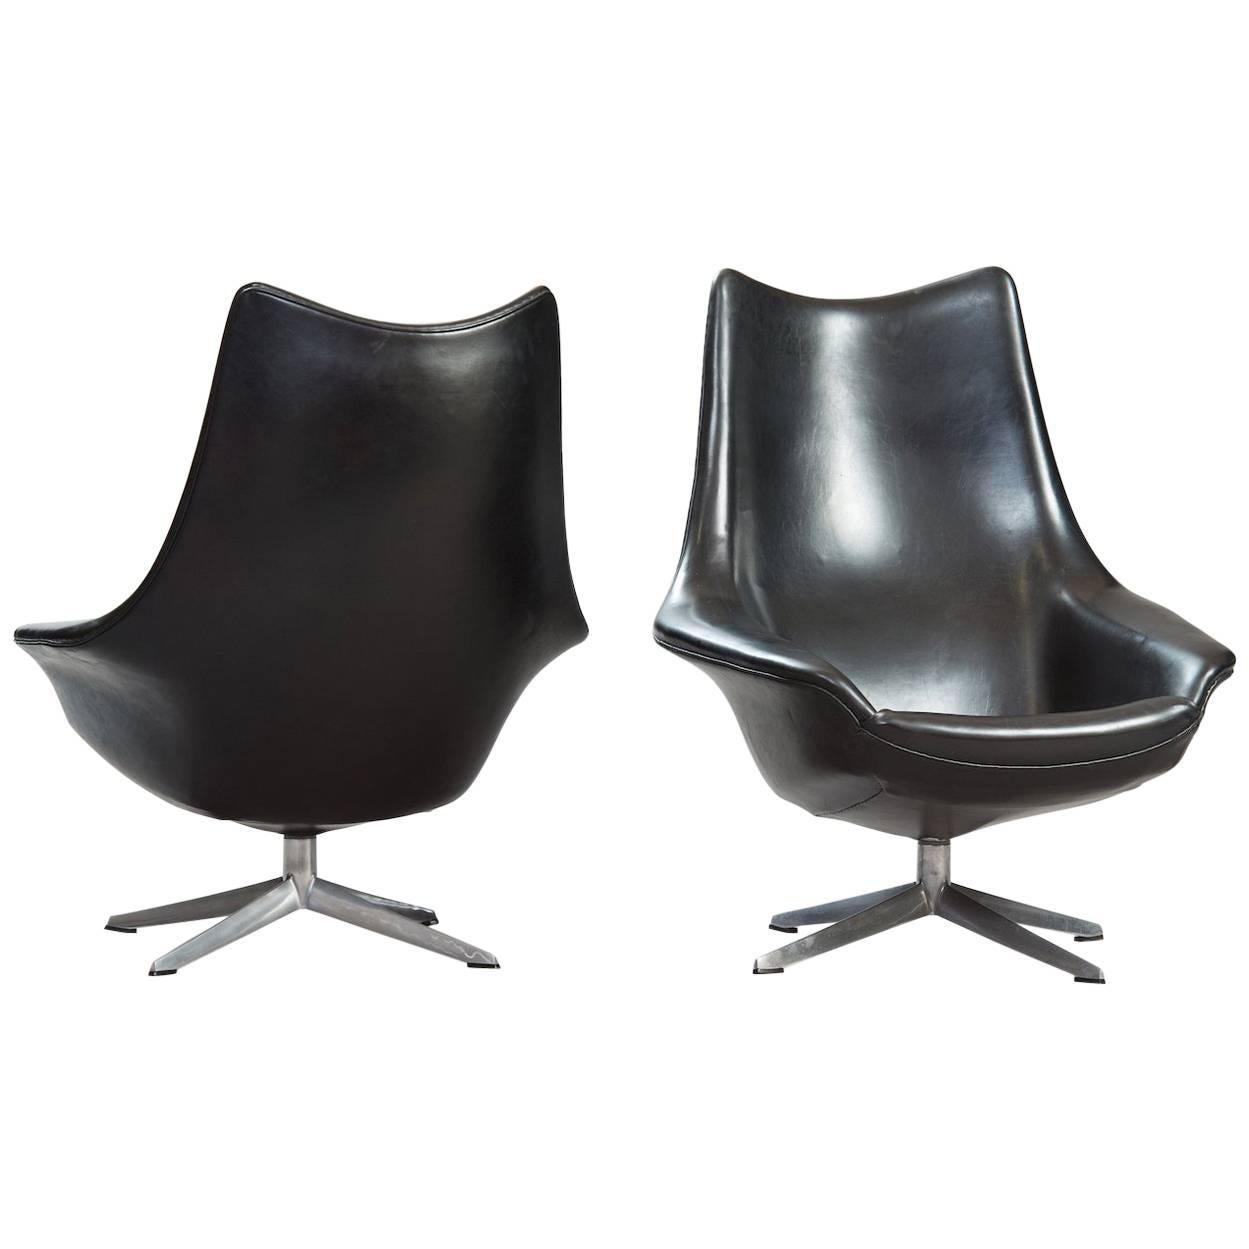 H.W. Klein "Pirouette" Swivel Chairs, Set of Two